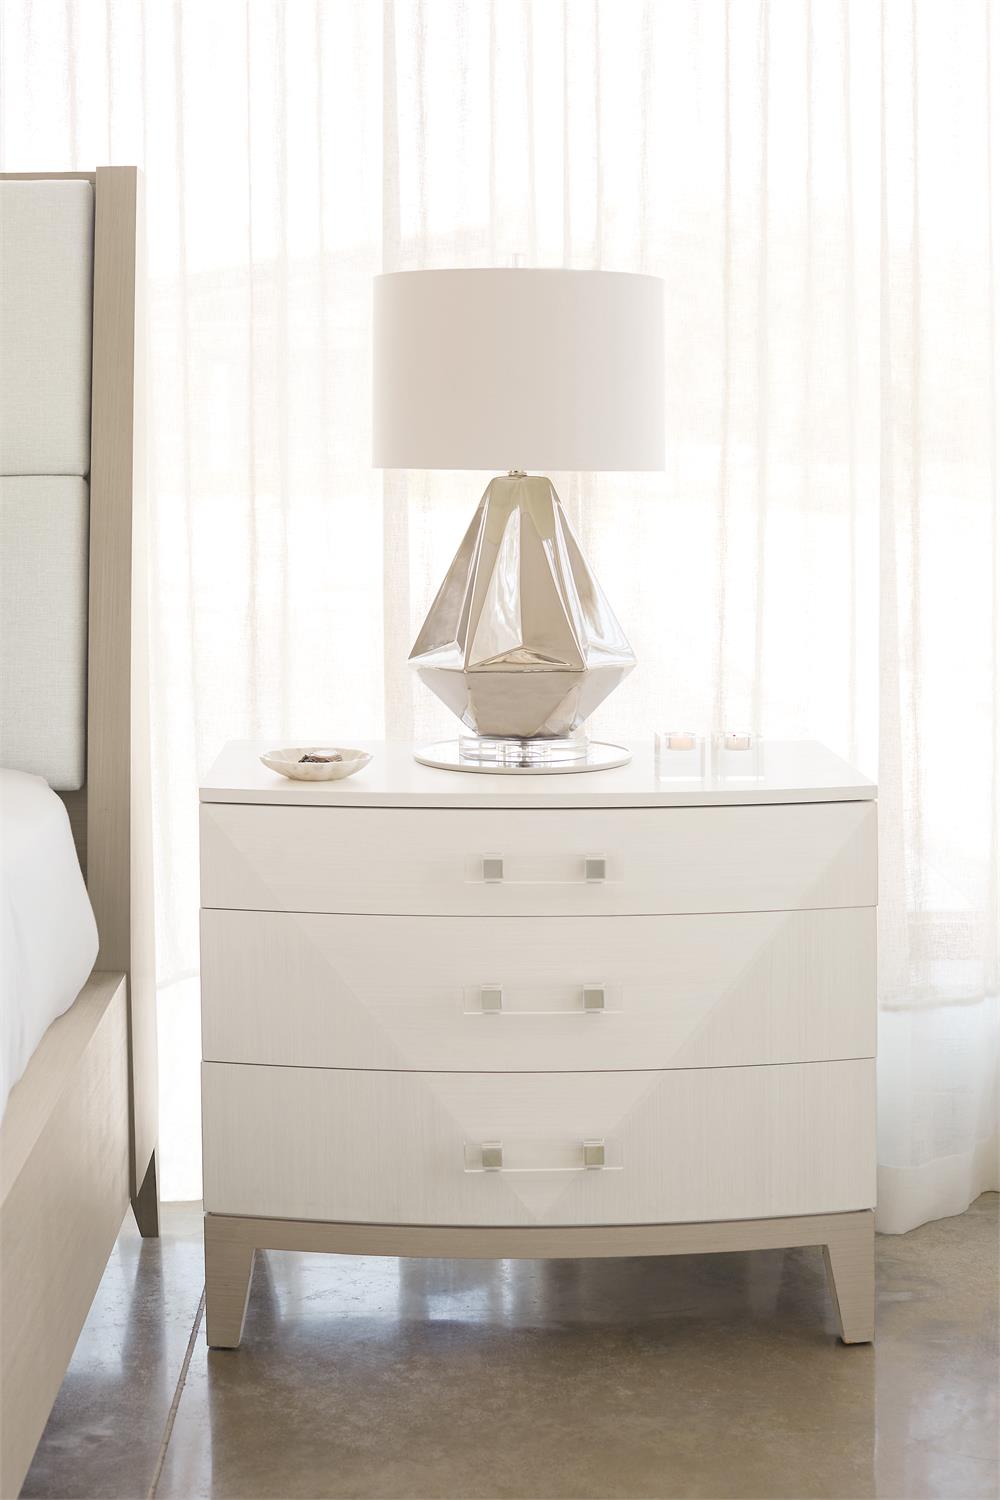 Aniom, Linear White, Large, Three drawers, Nightstand